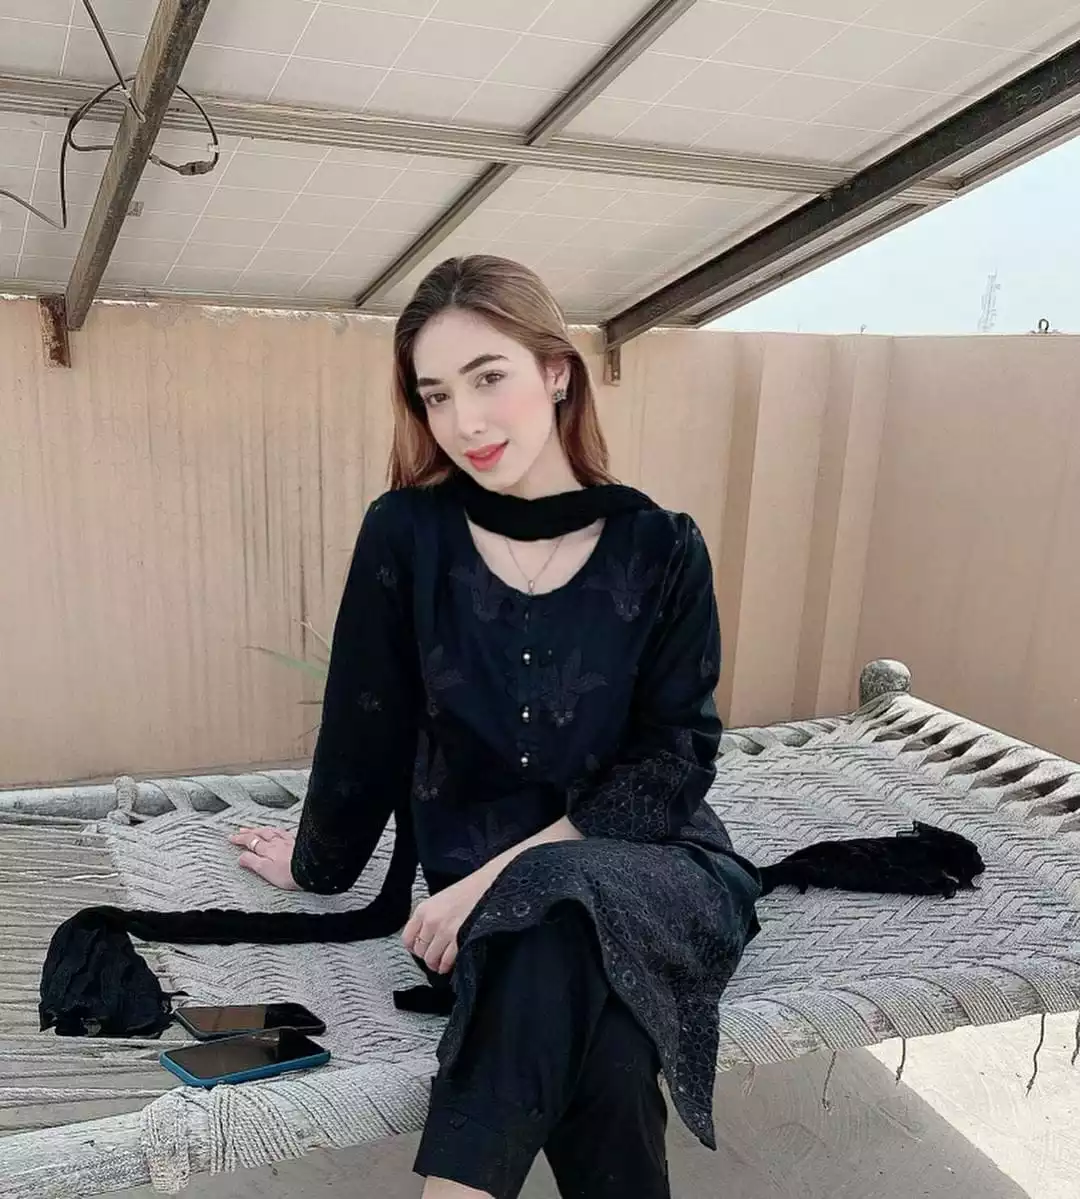 Lahore call girl service